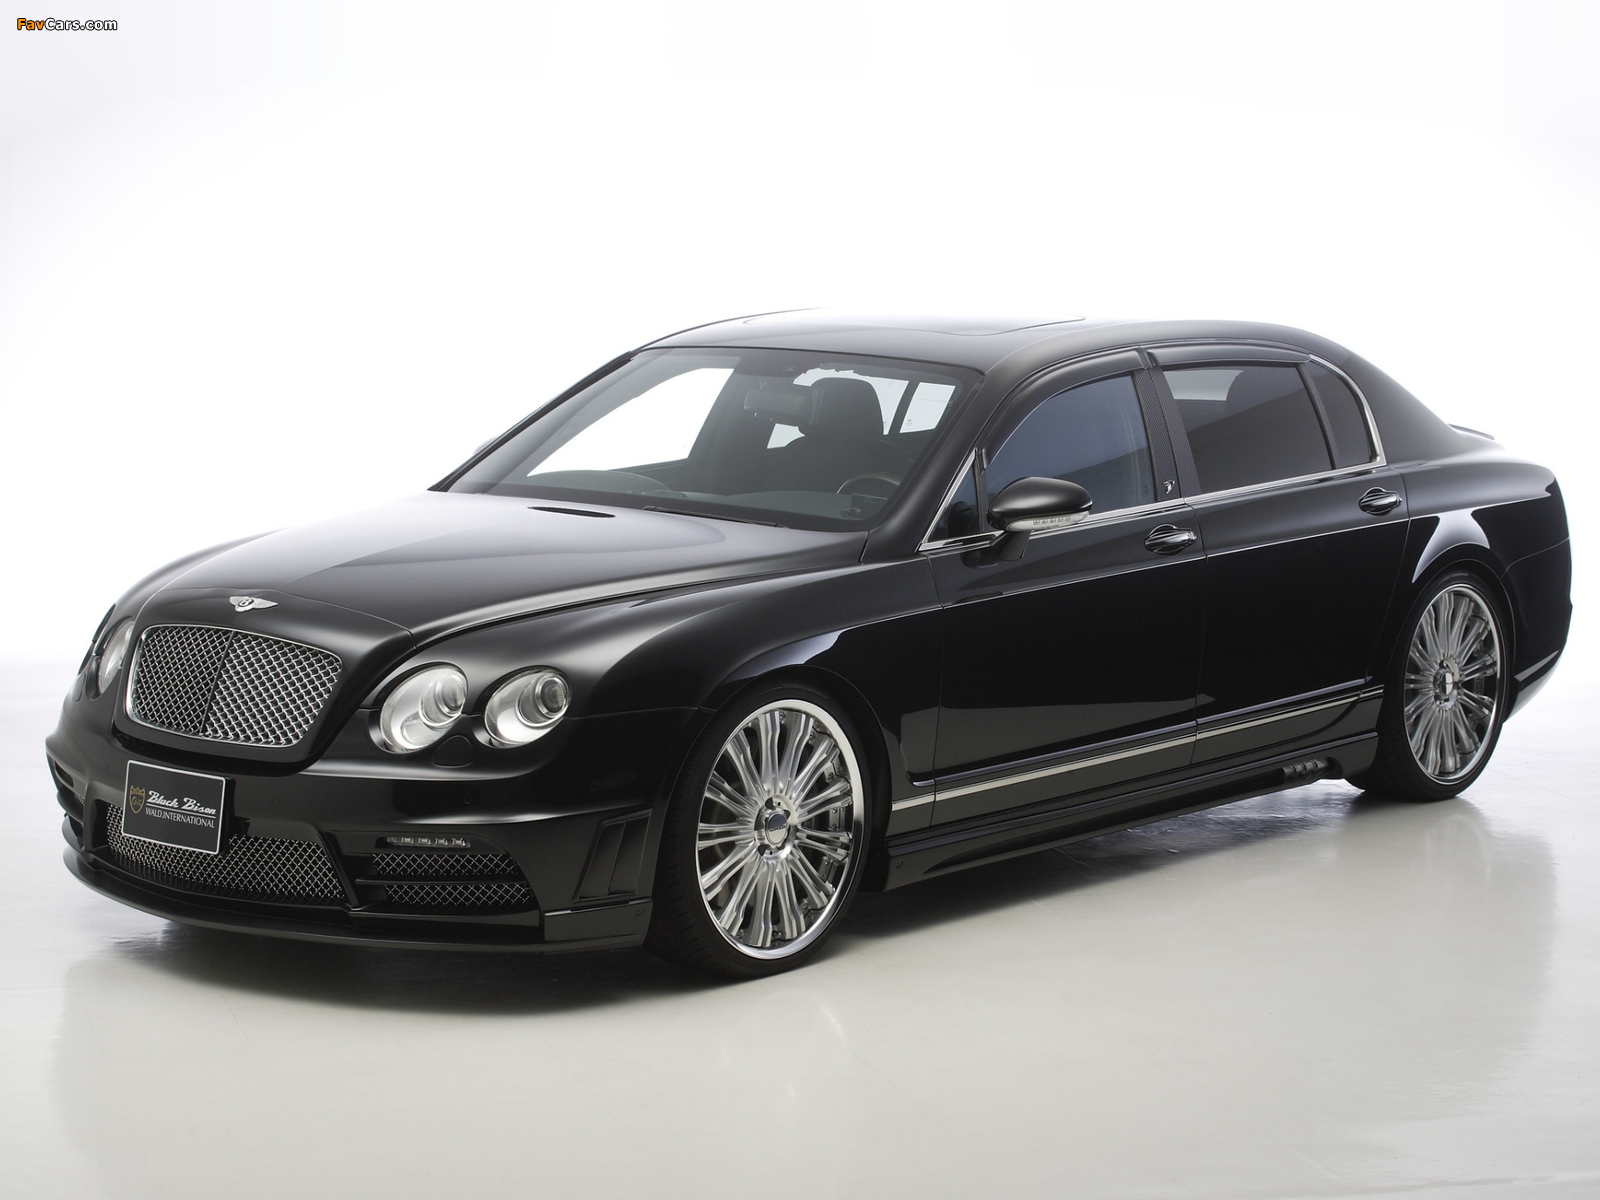 WALD Bentley Continental Flying Spur Black Bison Edition 2010 pictures (1600 x 1200)